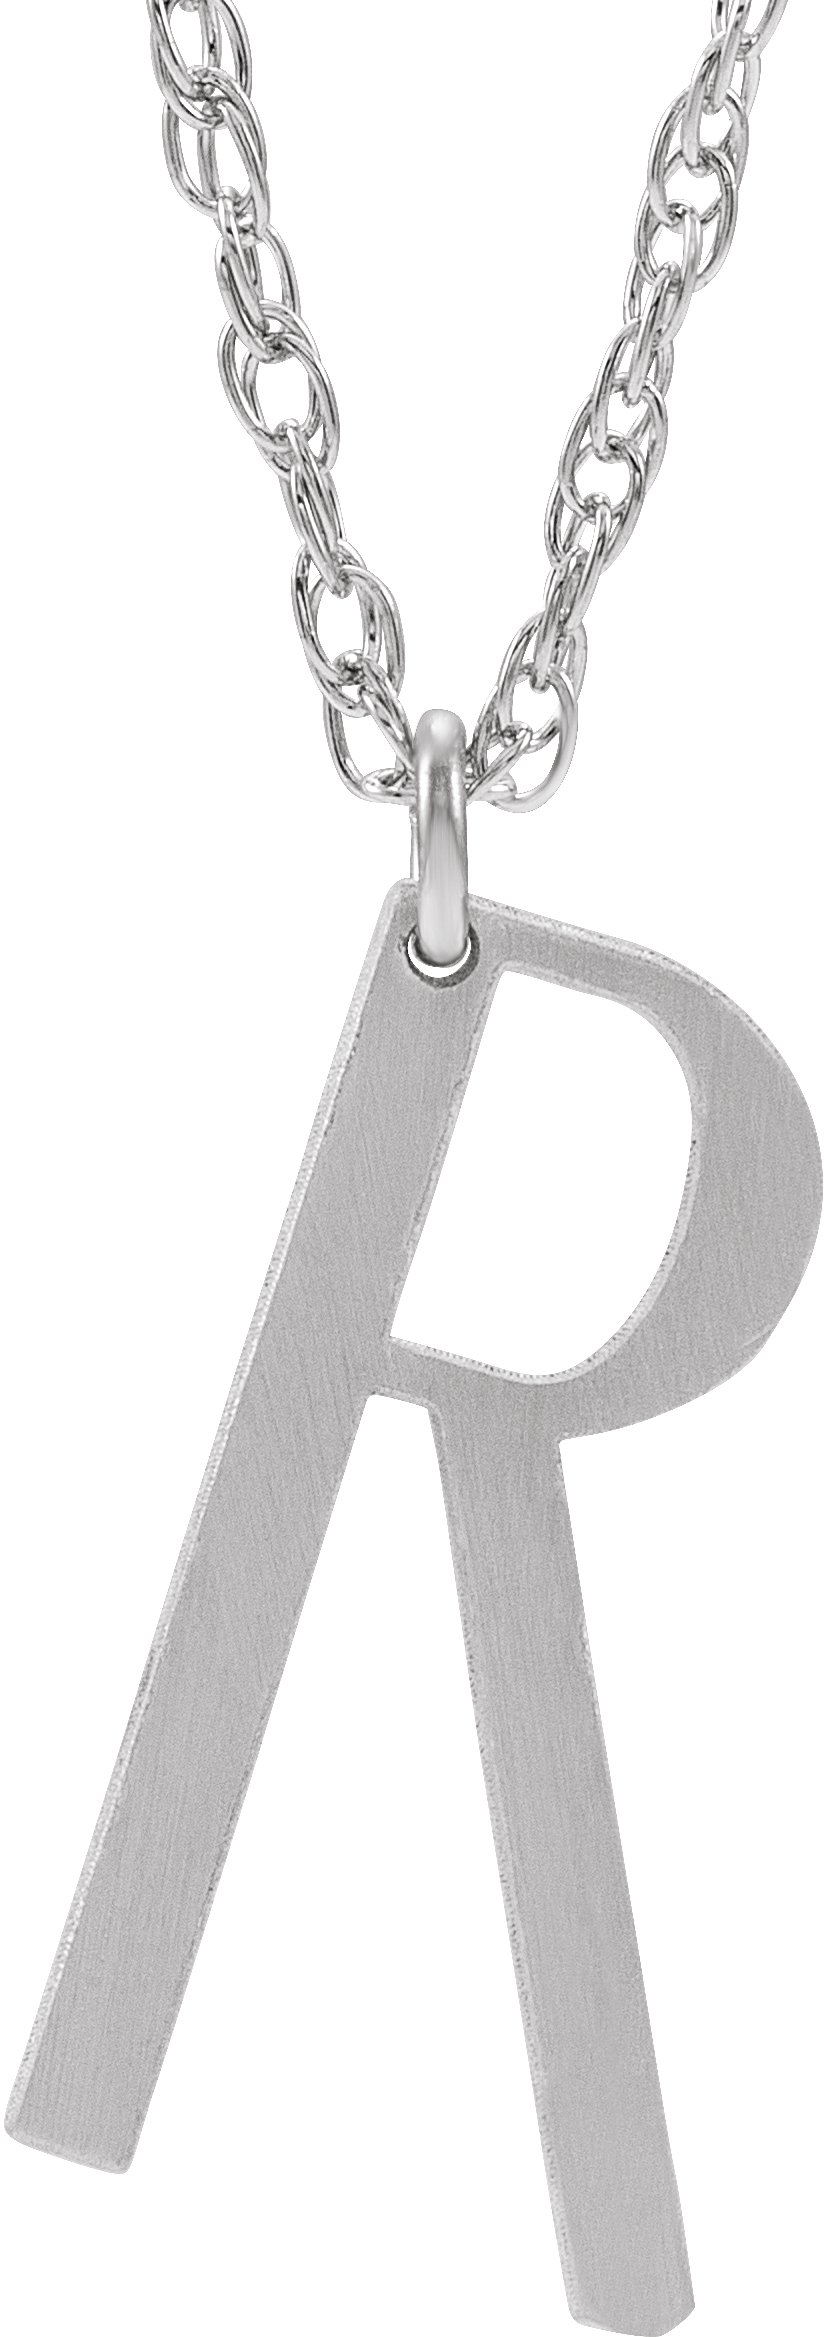 Sterling Silver Block Initial R 16-18" Necklace with Brush Finish